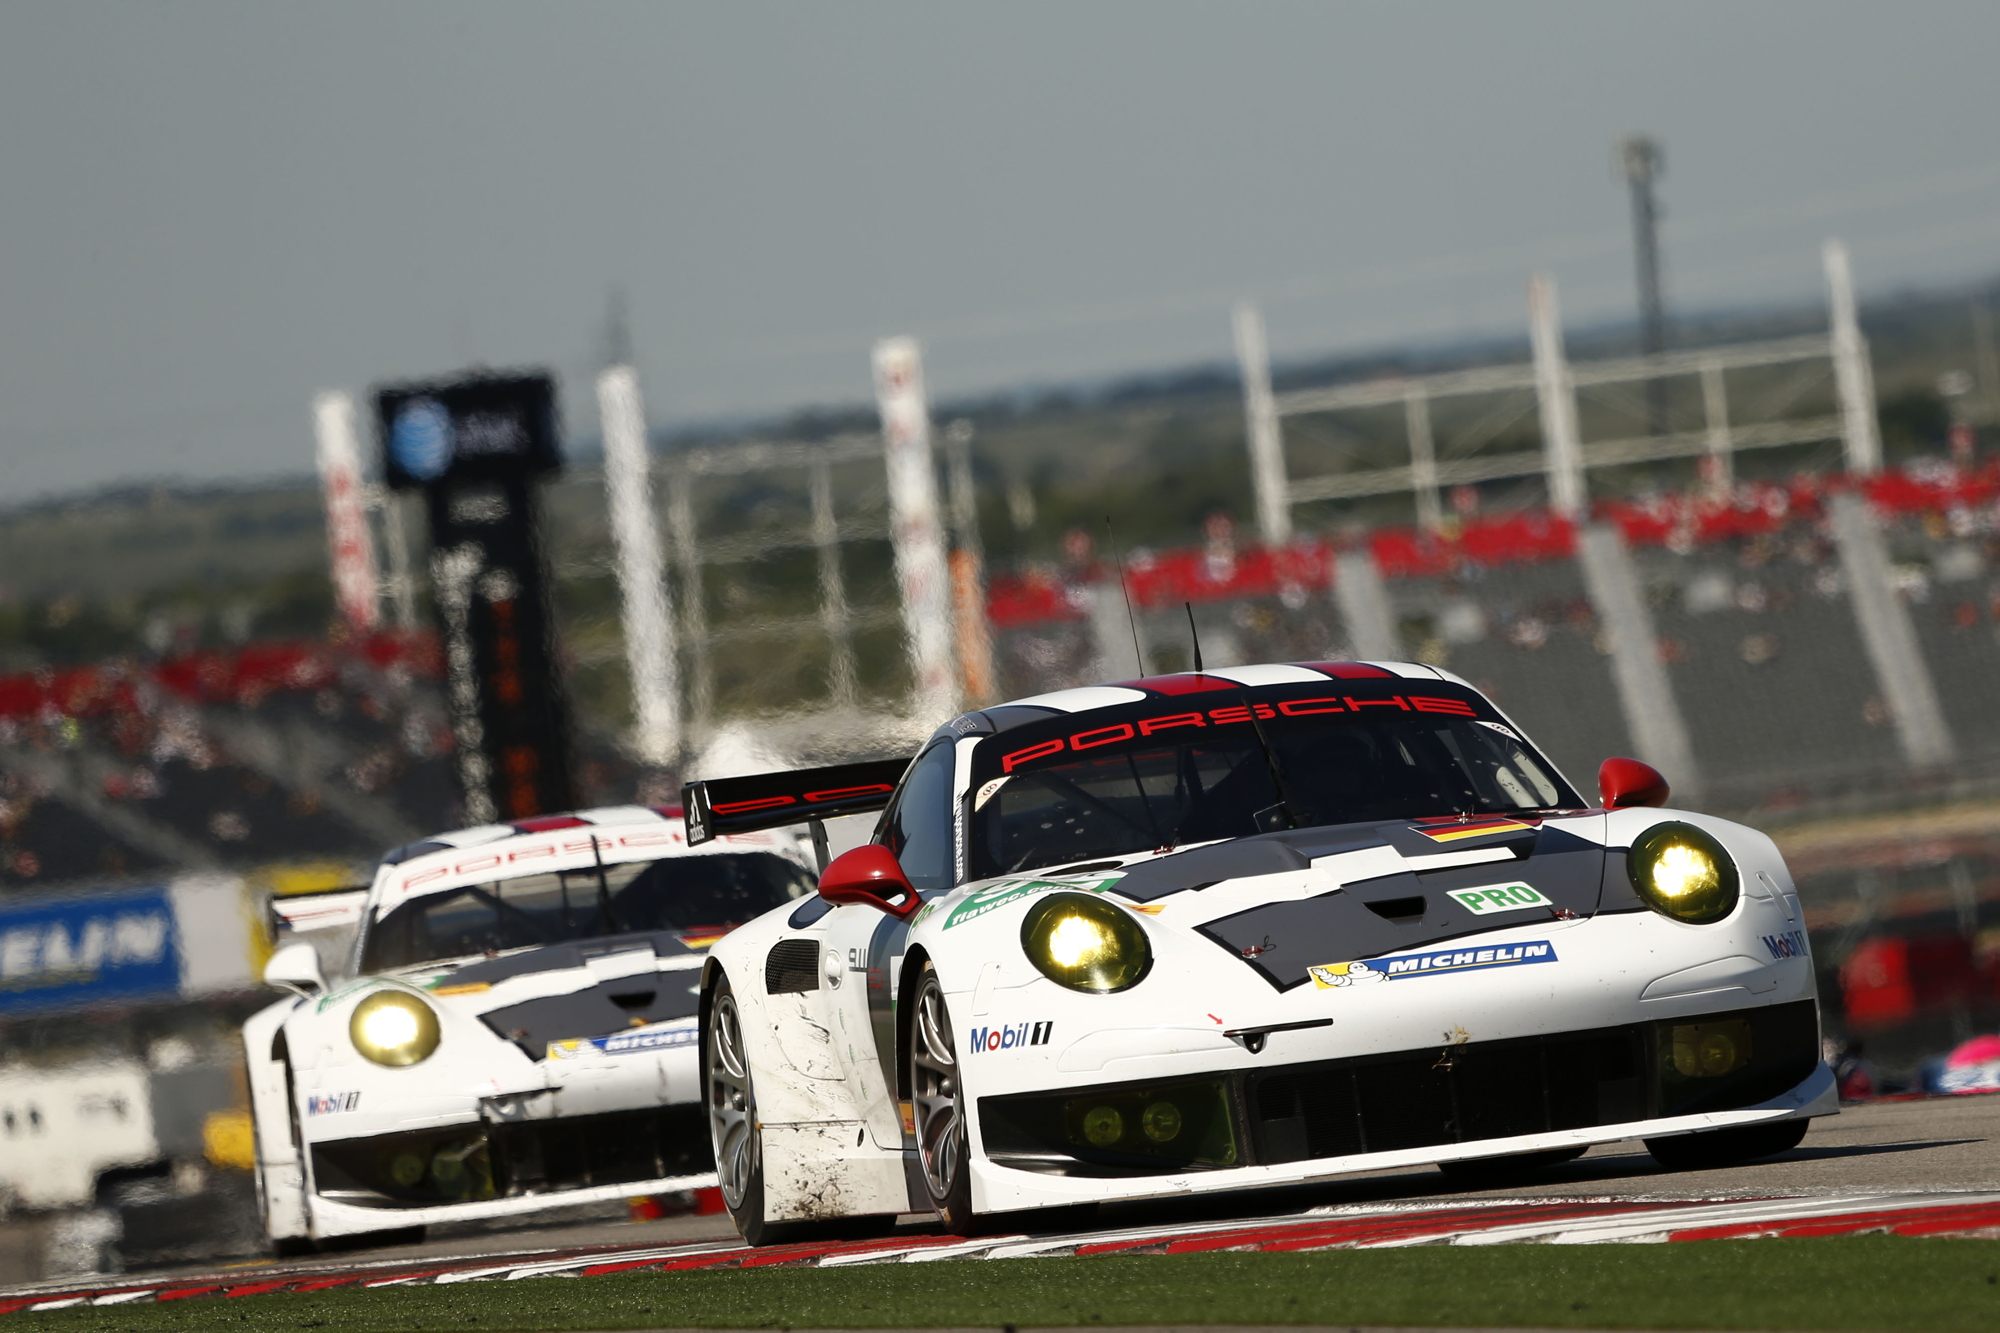 Porsche 911 well represented on 2014 FIA WEC grid - Total 911